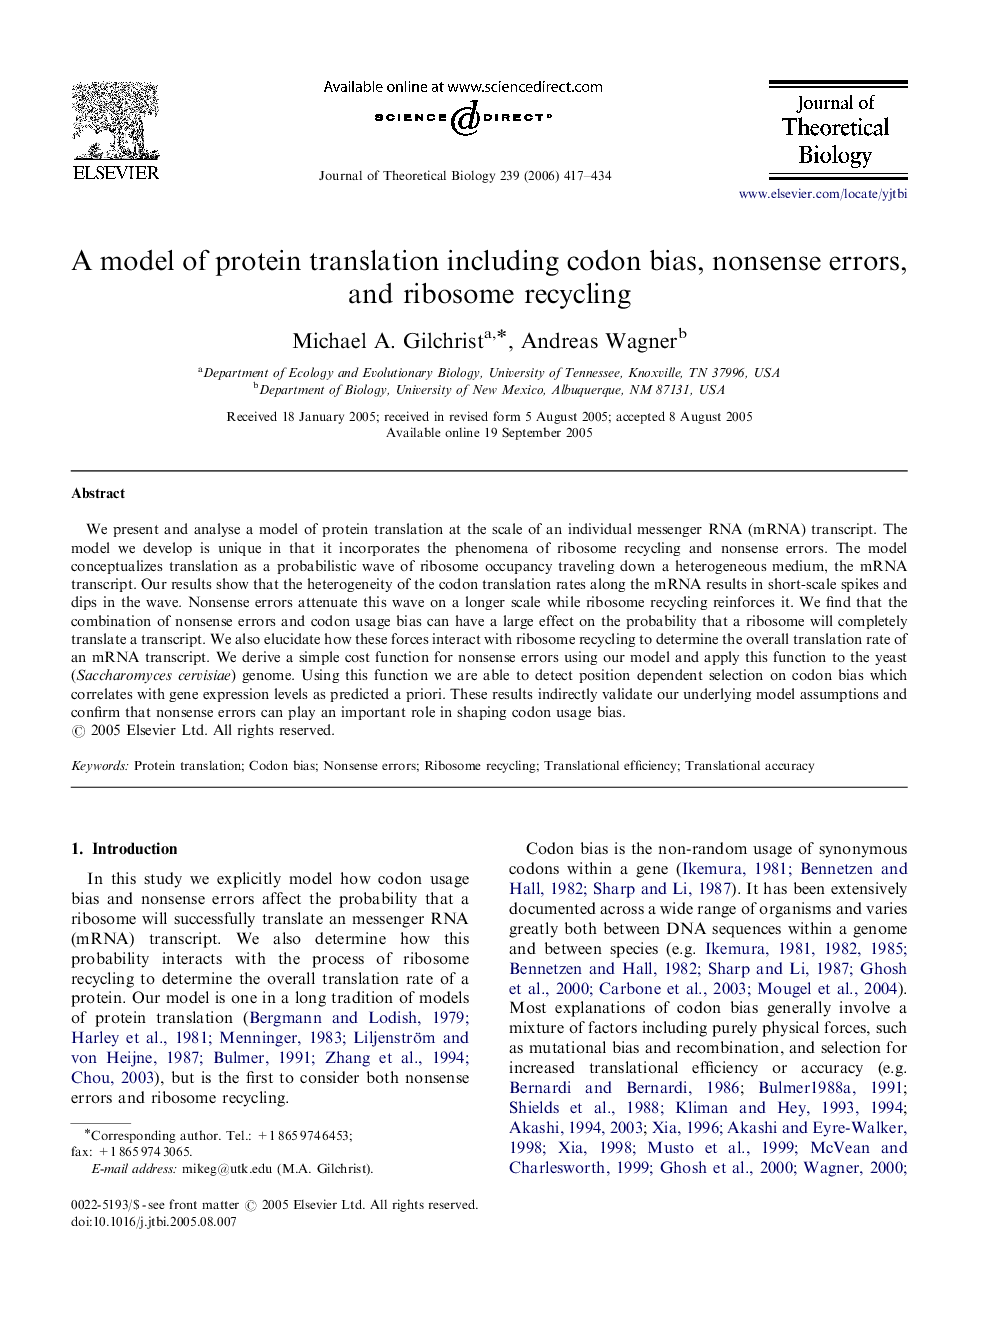 A model of protein translation including codon bias, nonsense errors, and ribosome recycling